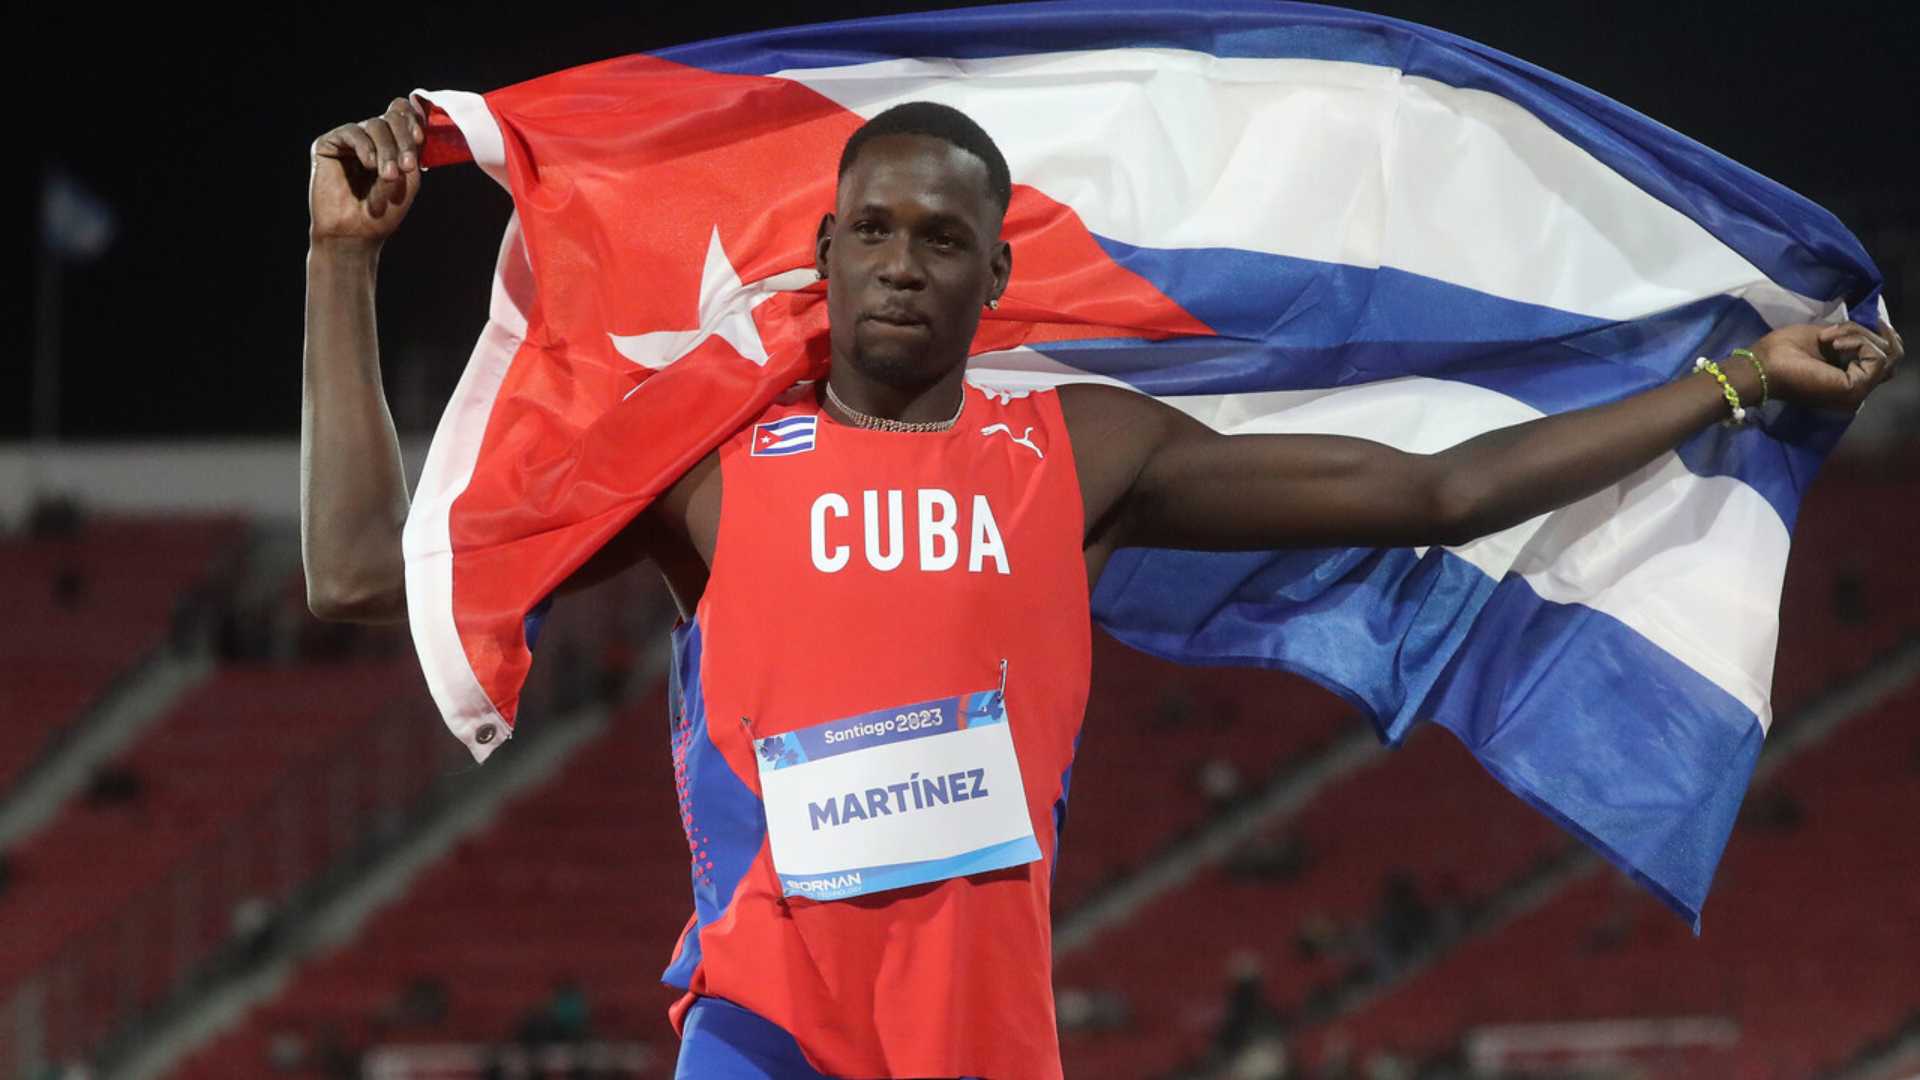 Cuba takes gold and bronze in the triple jump